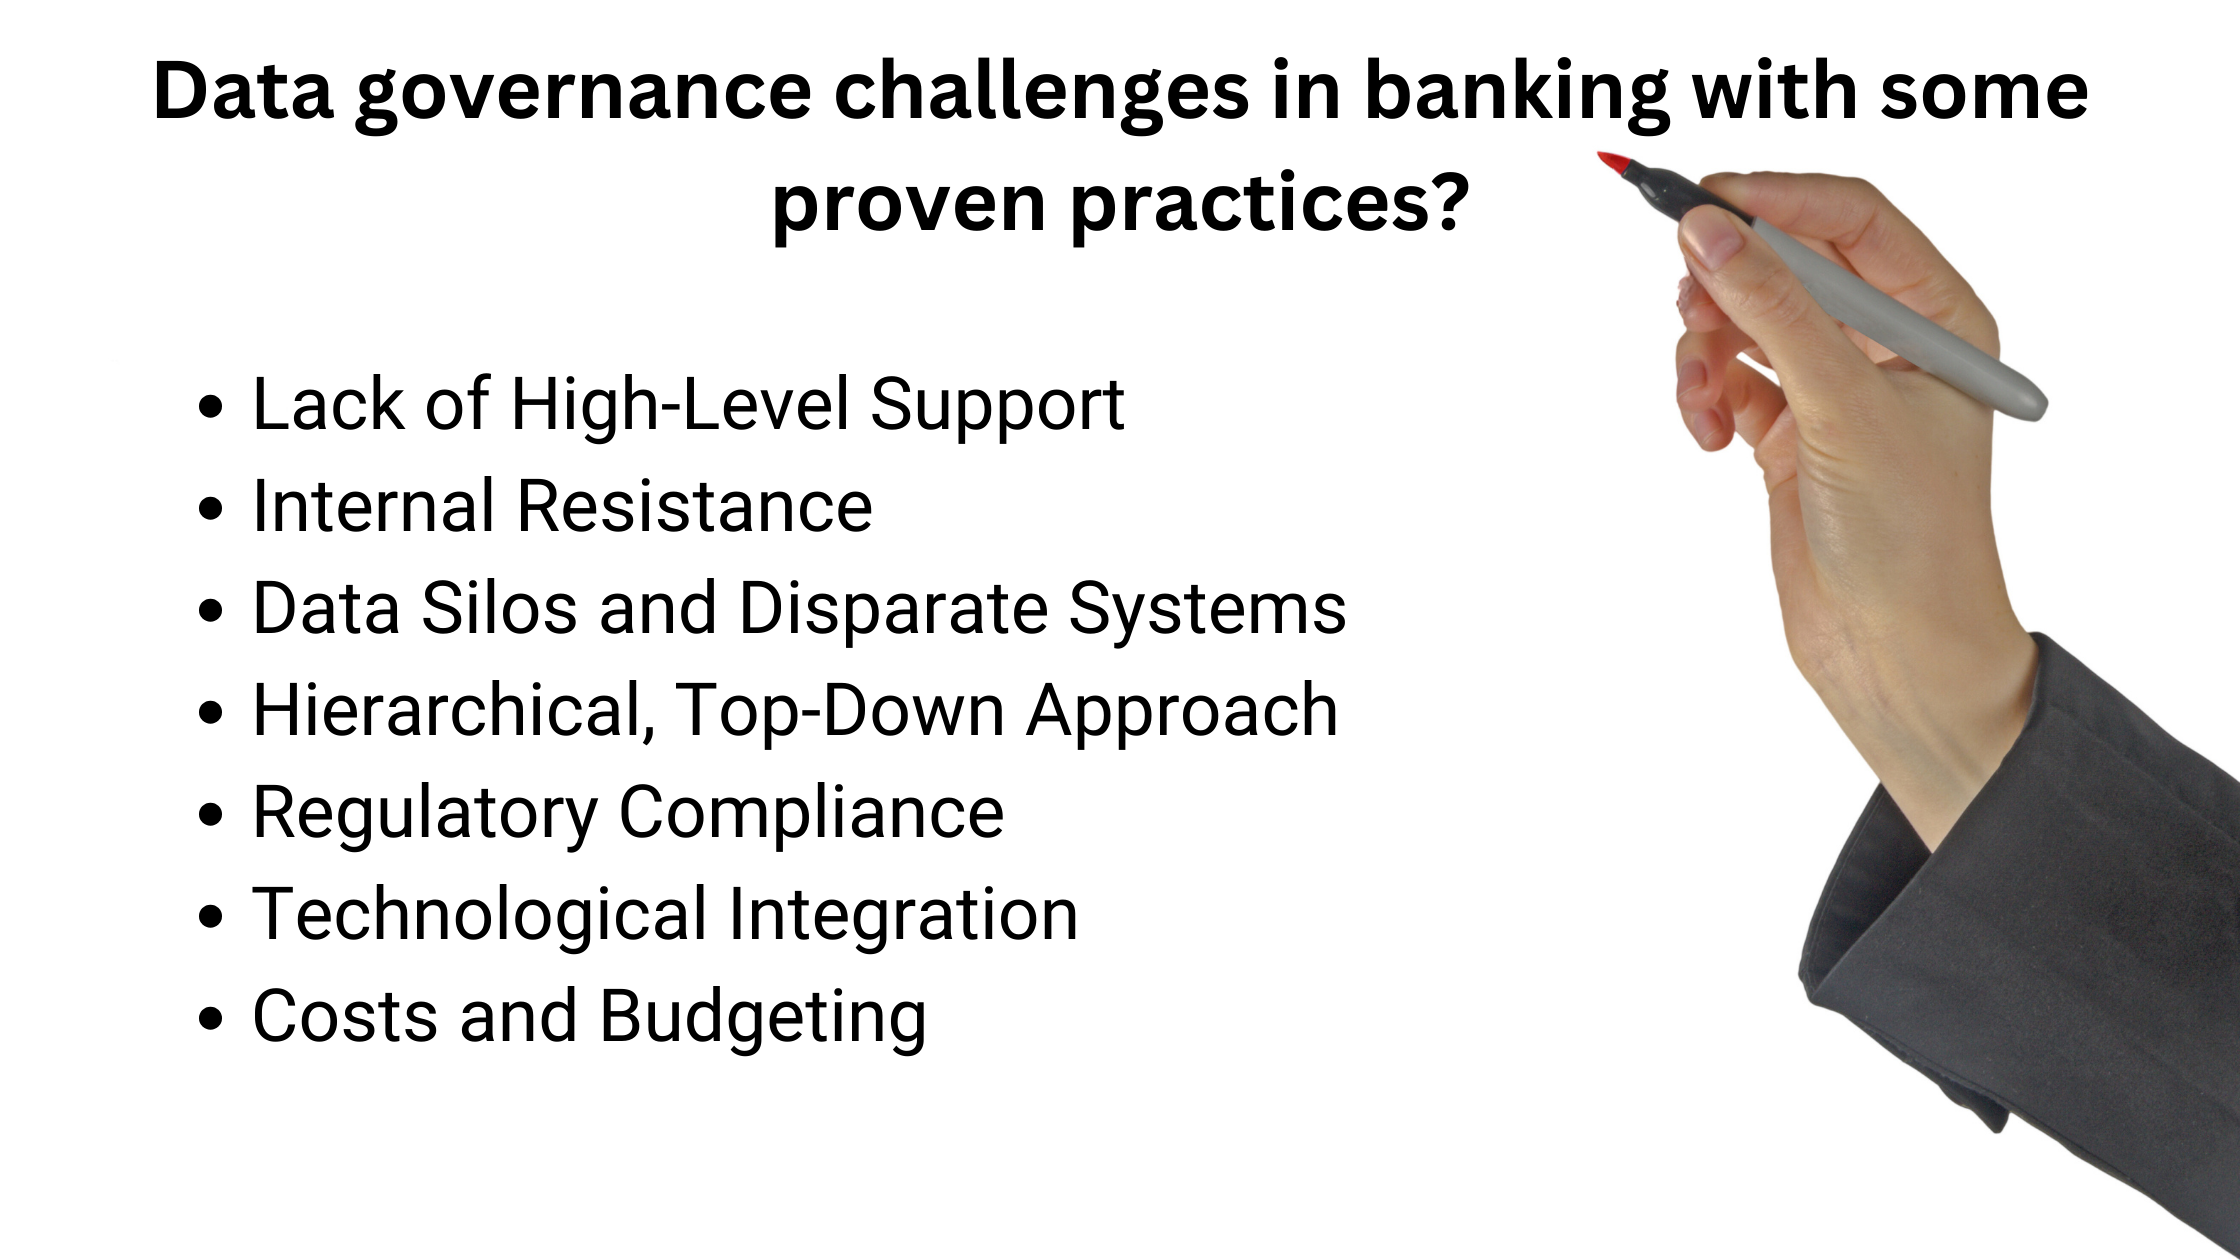 How do we solve data governance challenges in banking with some proven practices?